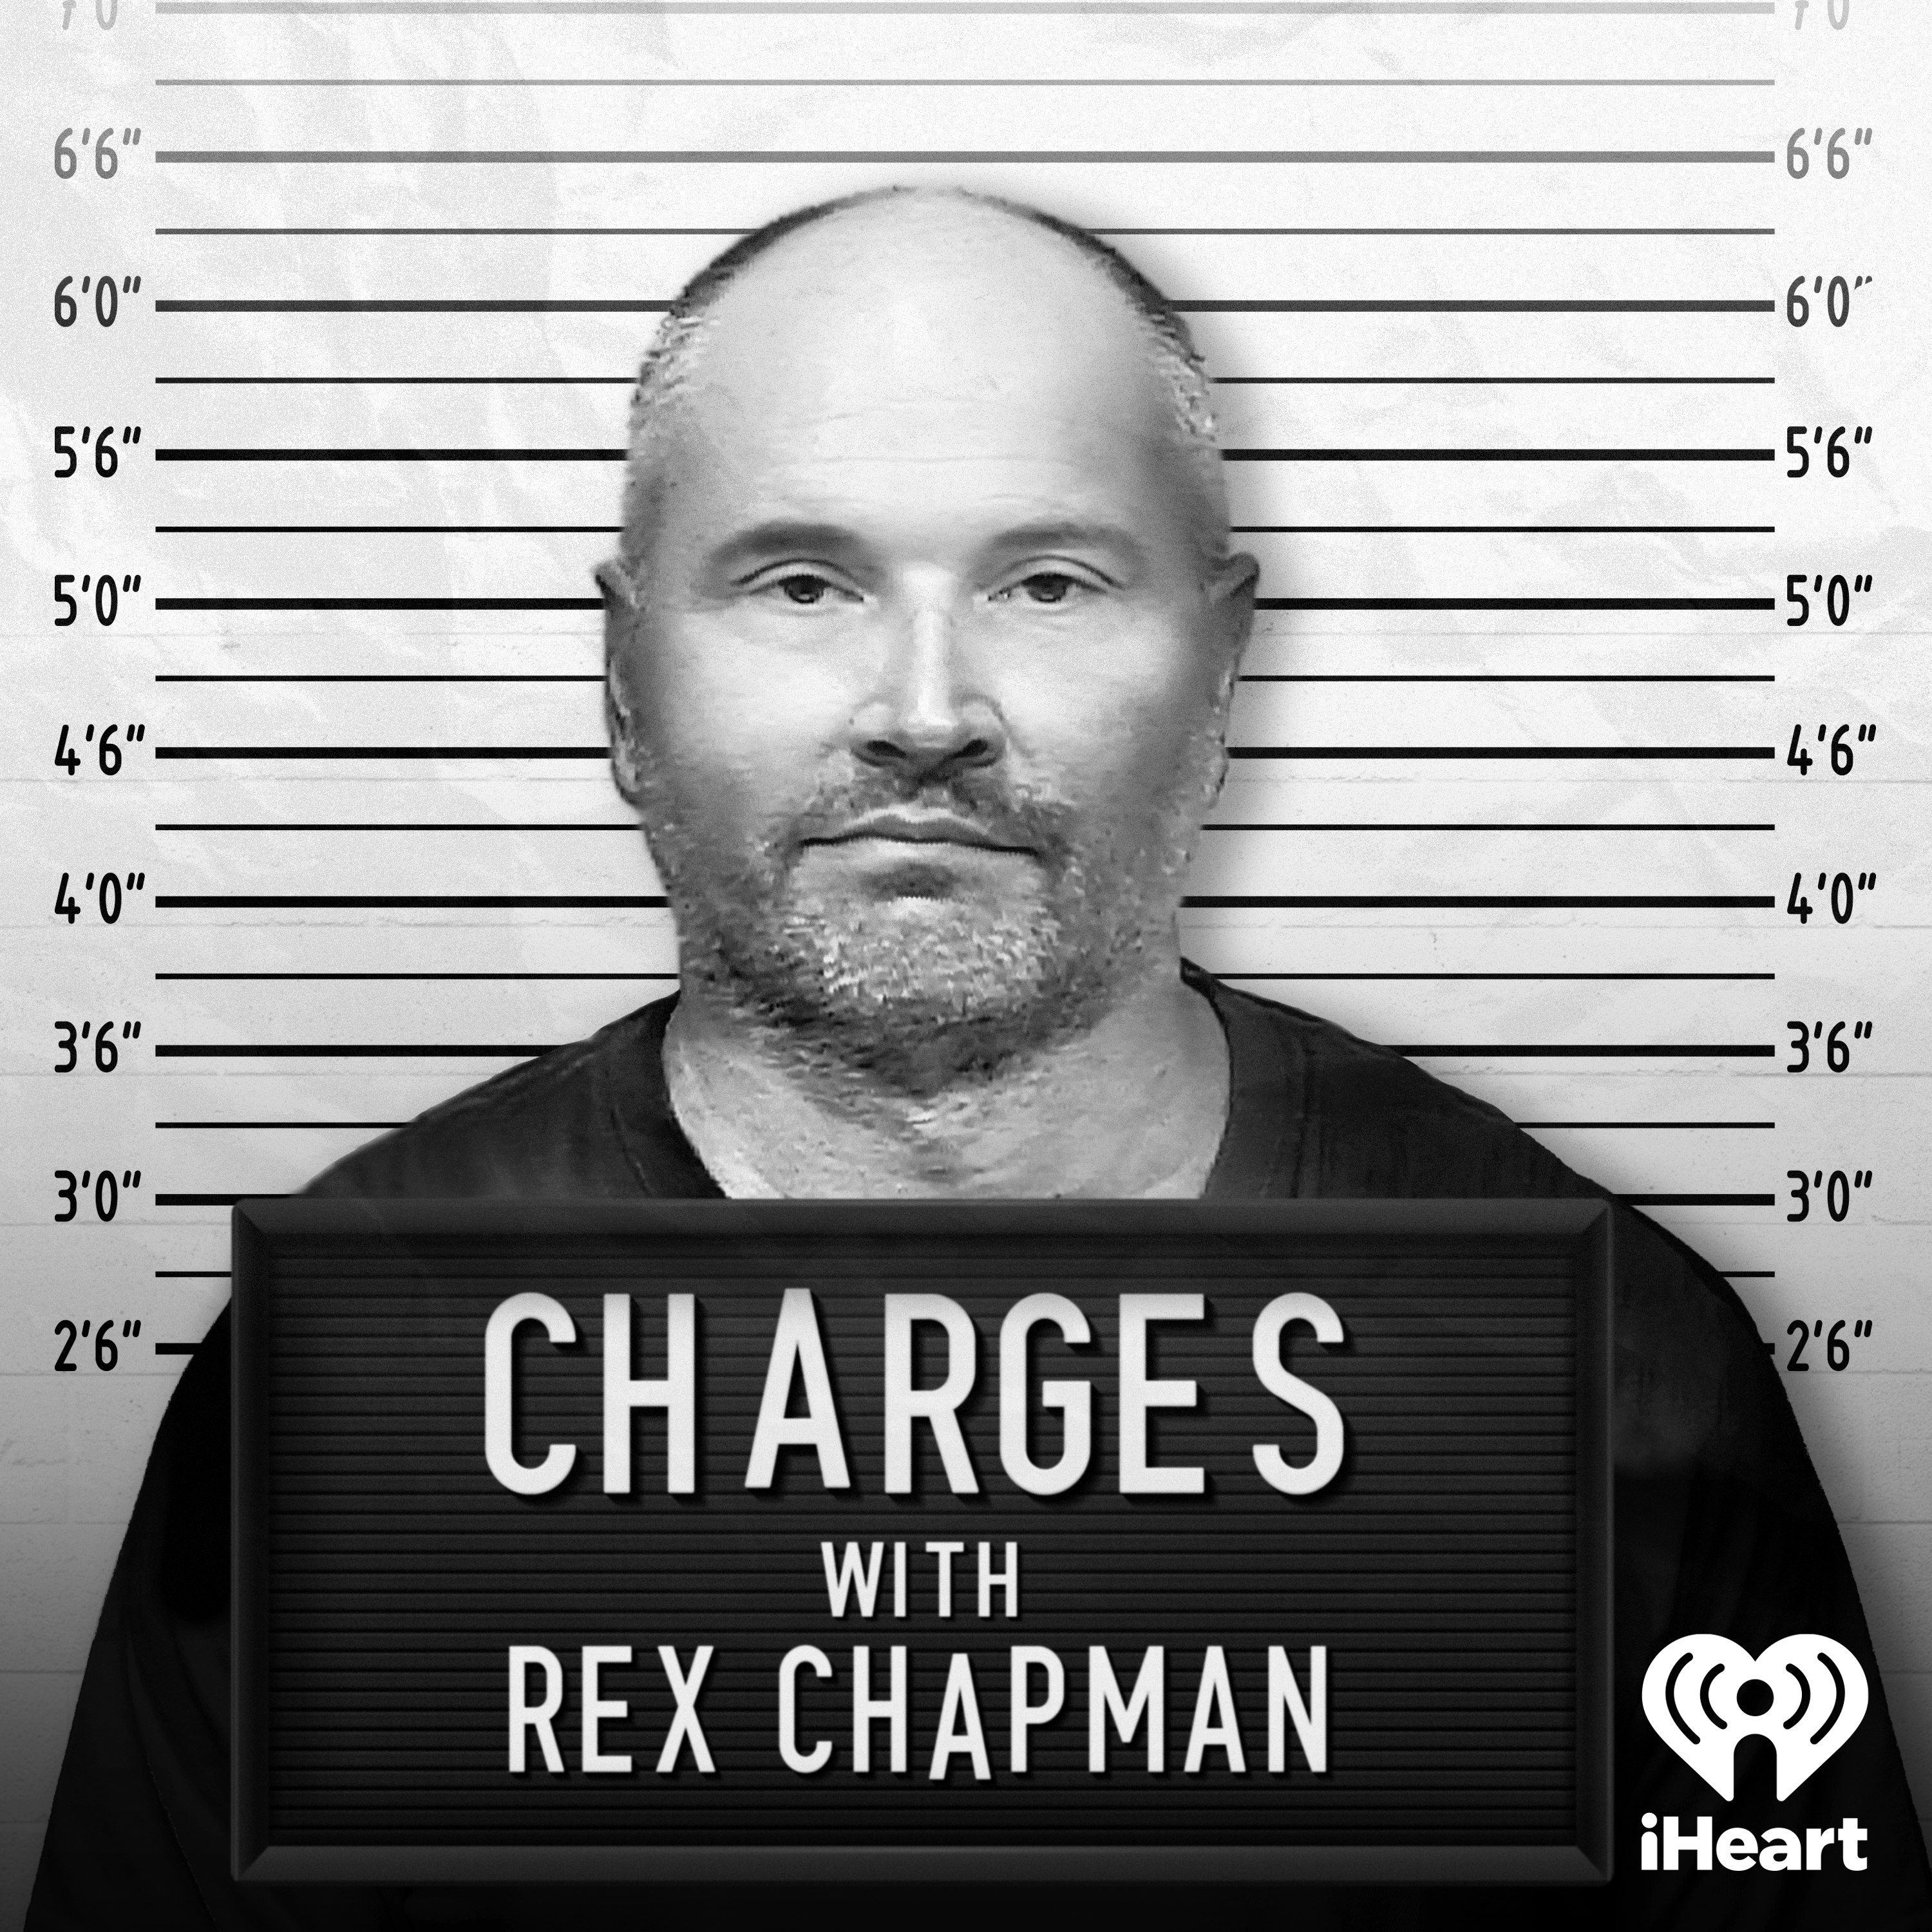 Introducing: Charges with Rex Chapman